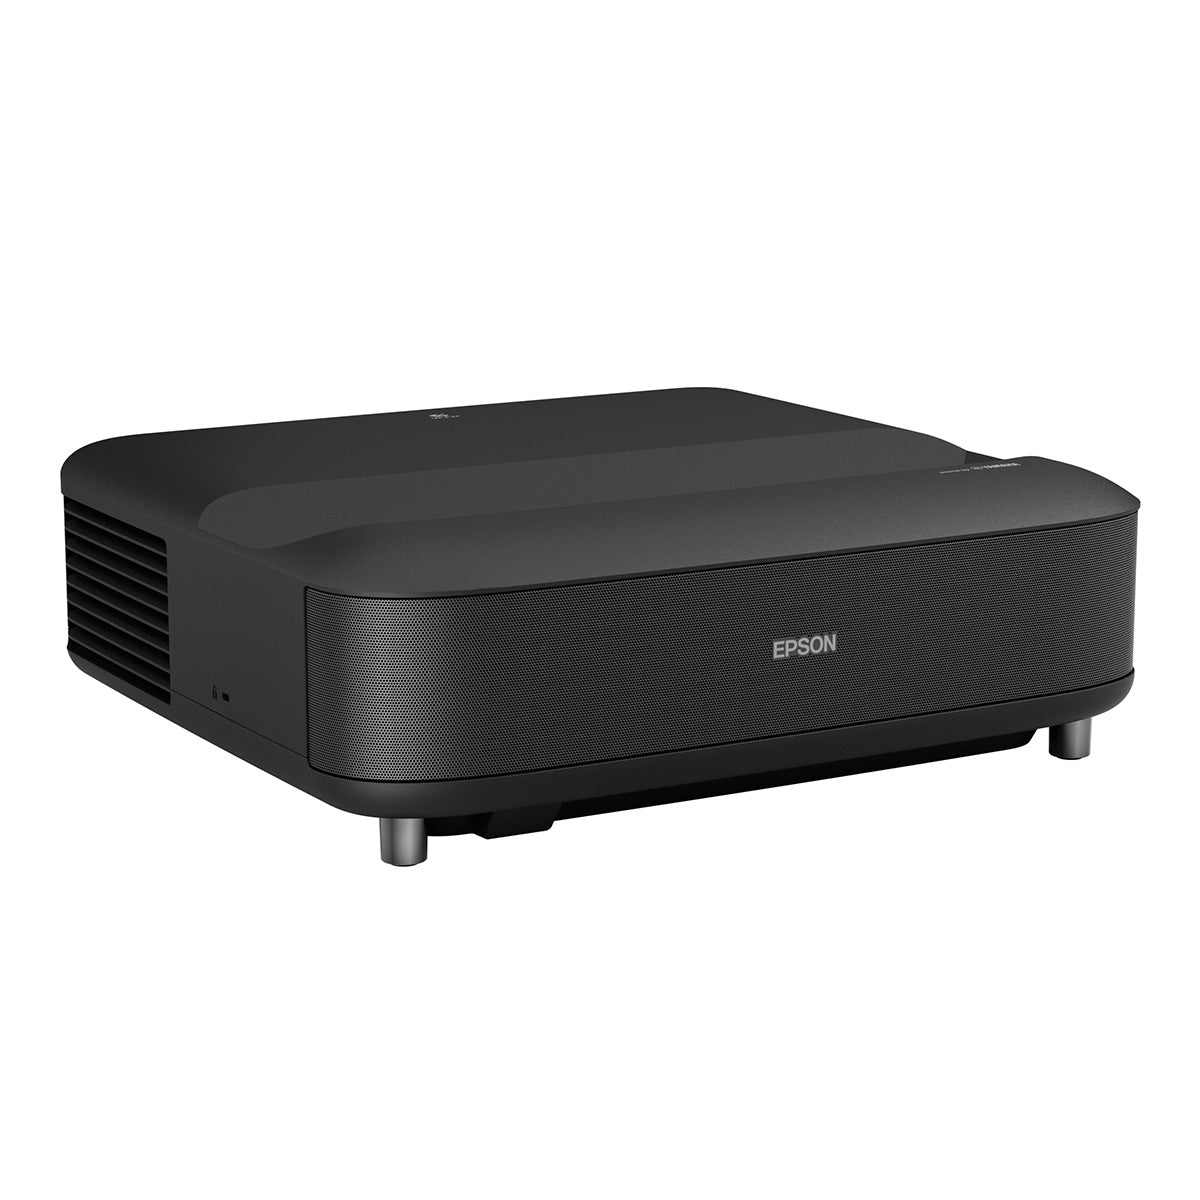 Epson LS650 EpiqVision Ultra Short-Throw Laser Projector with Smart Streaming (Black)